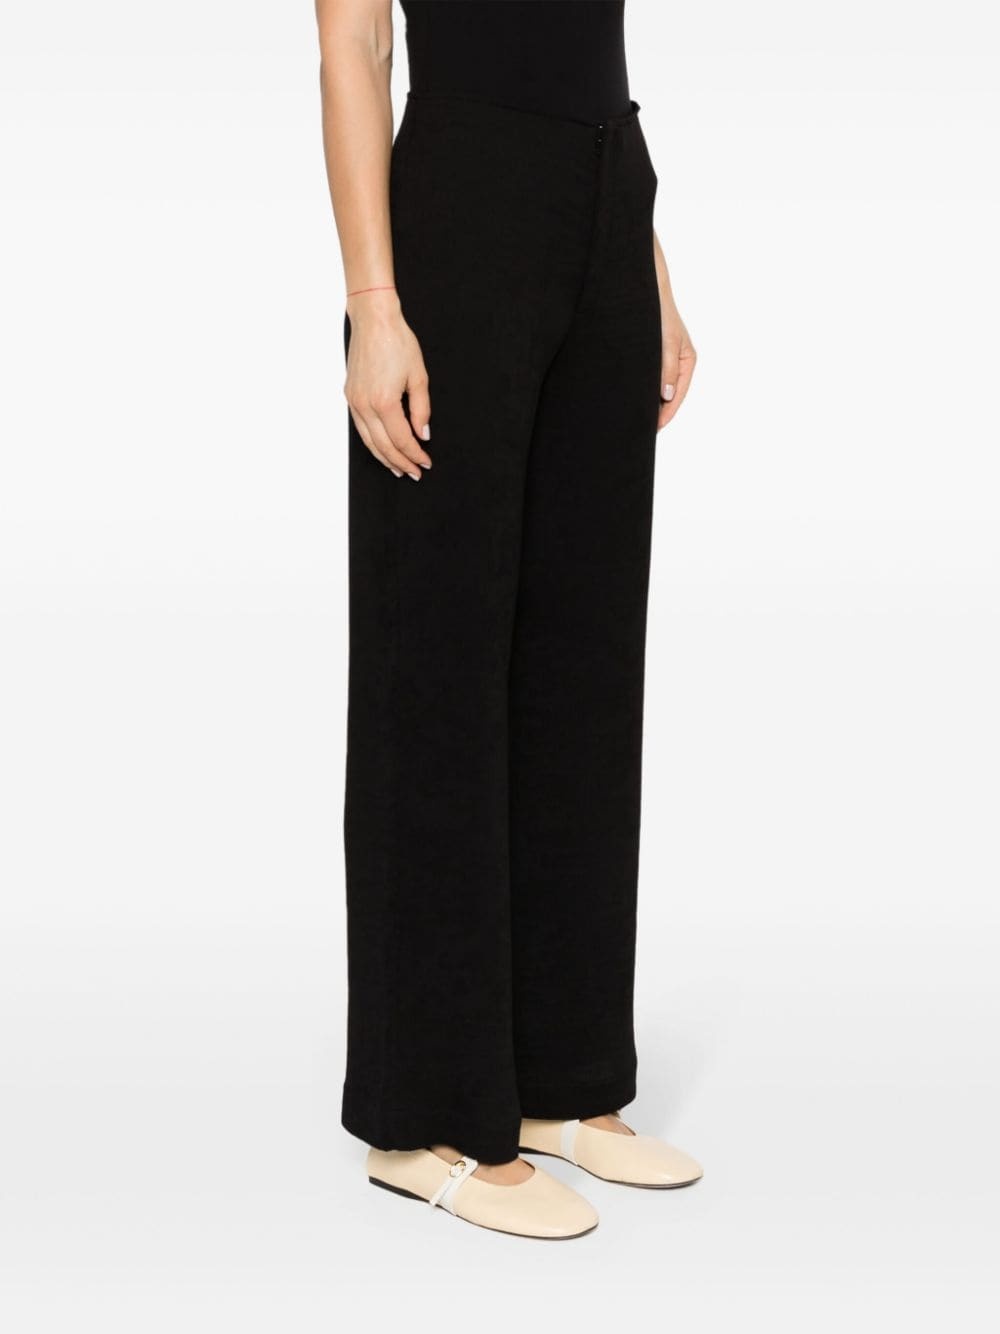 Marchei high-waisted trousers - 3